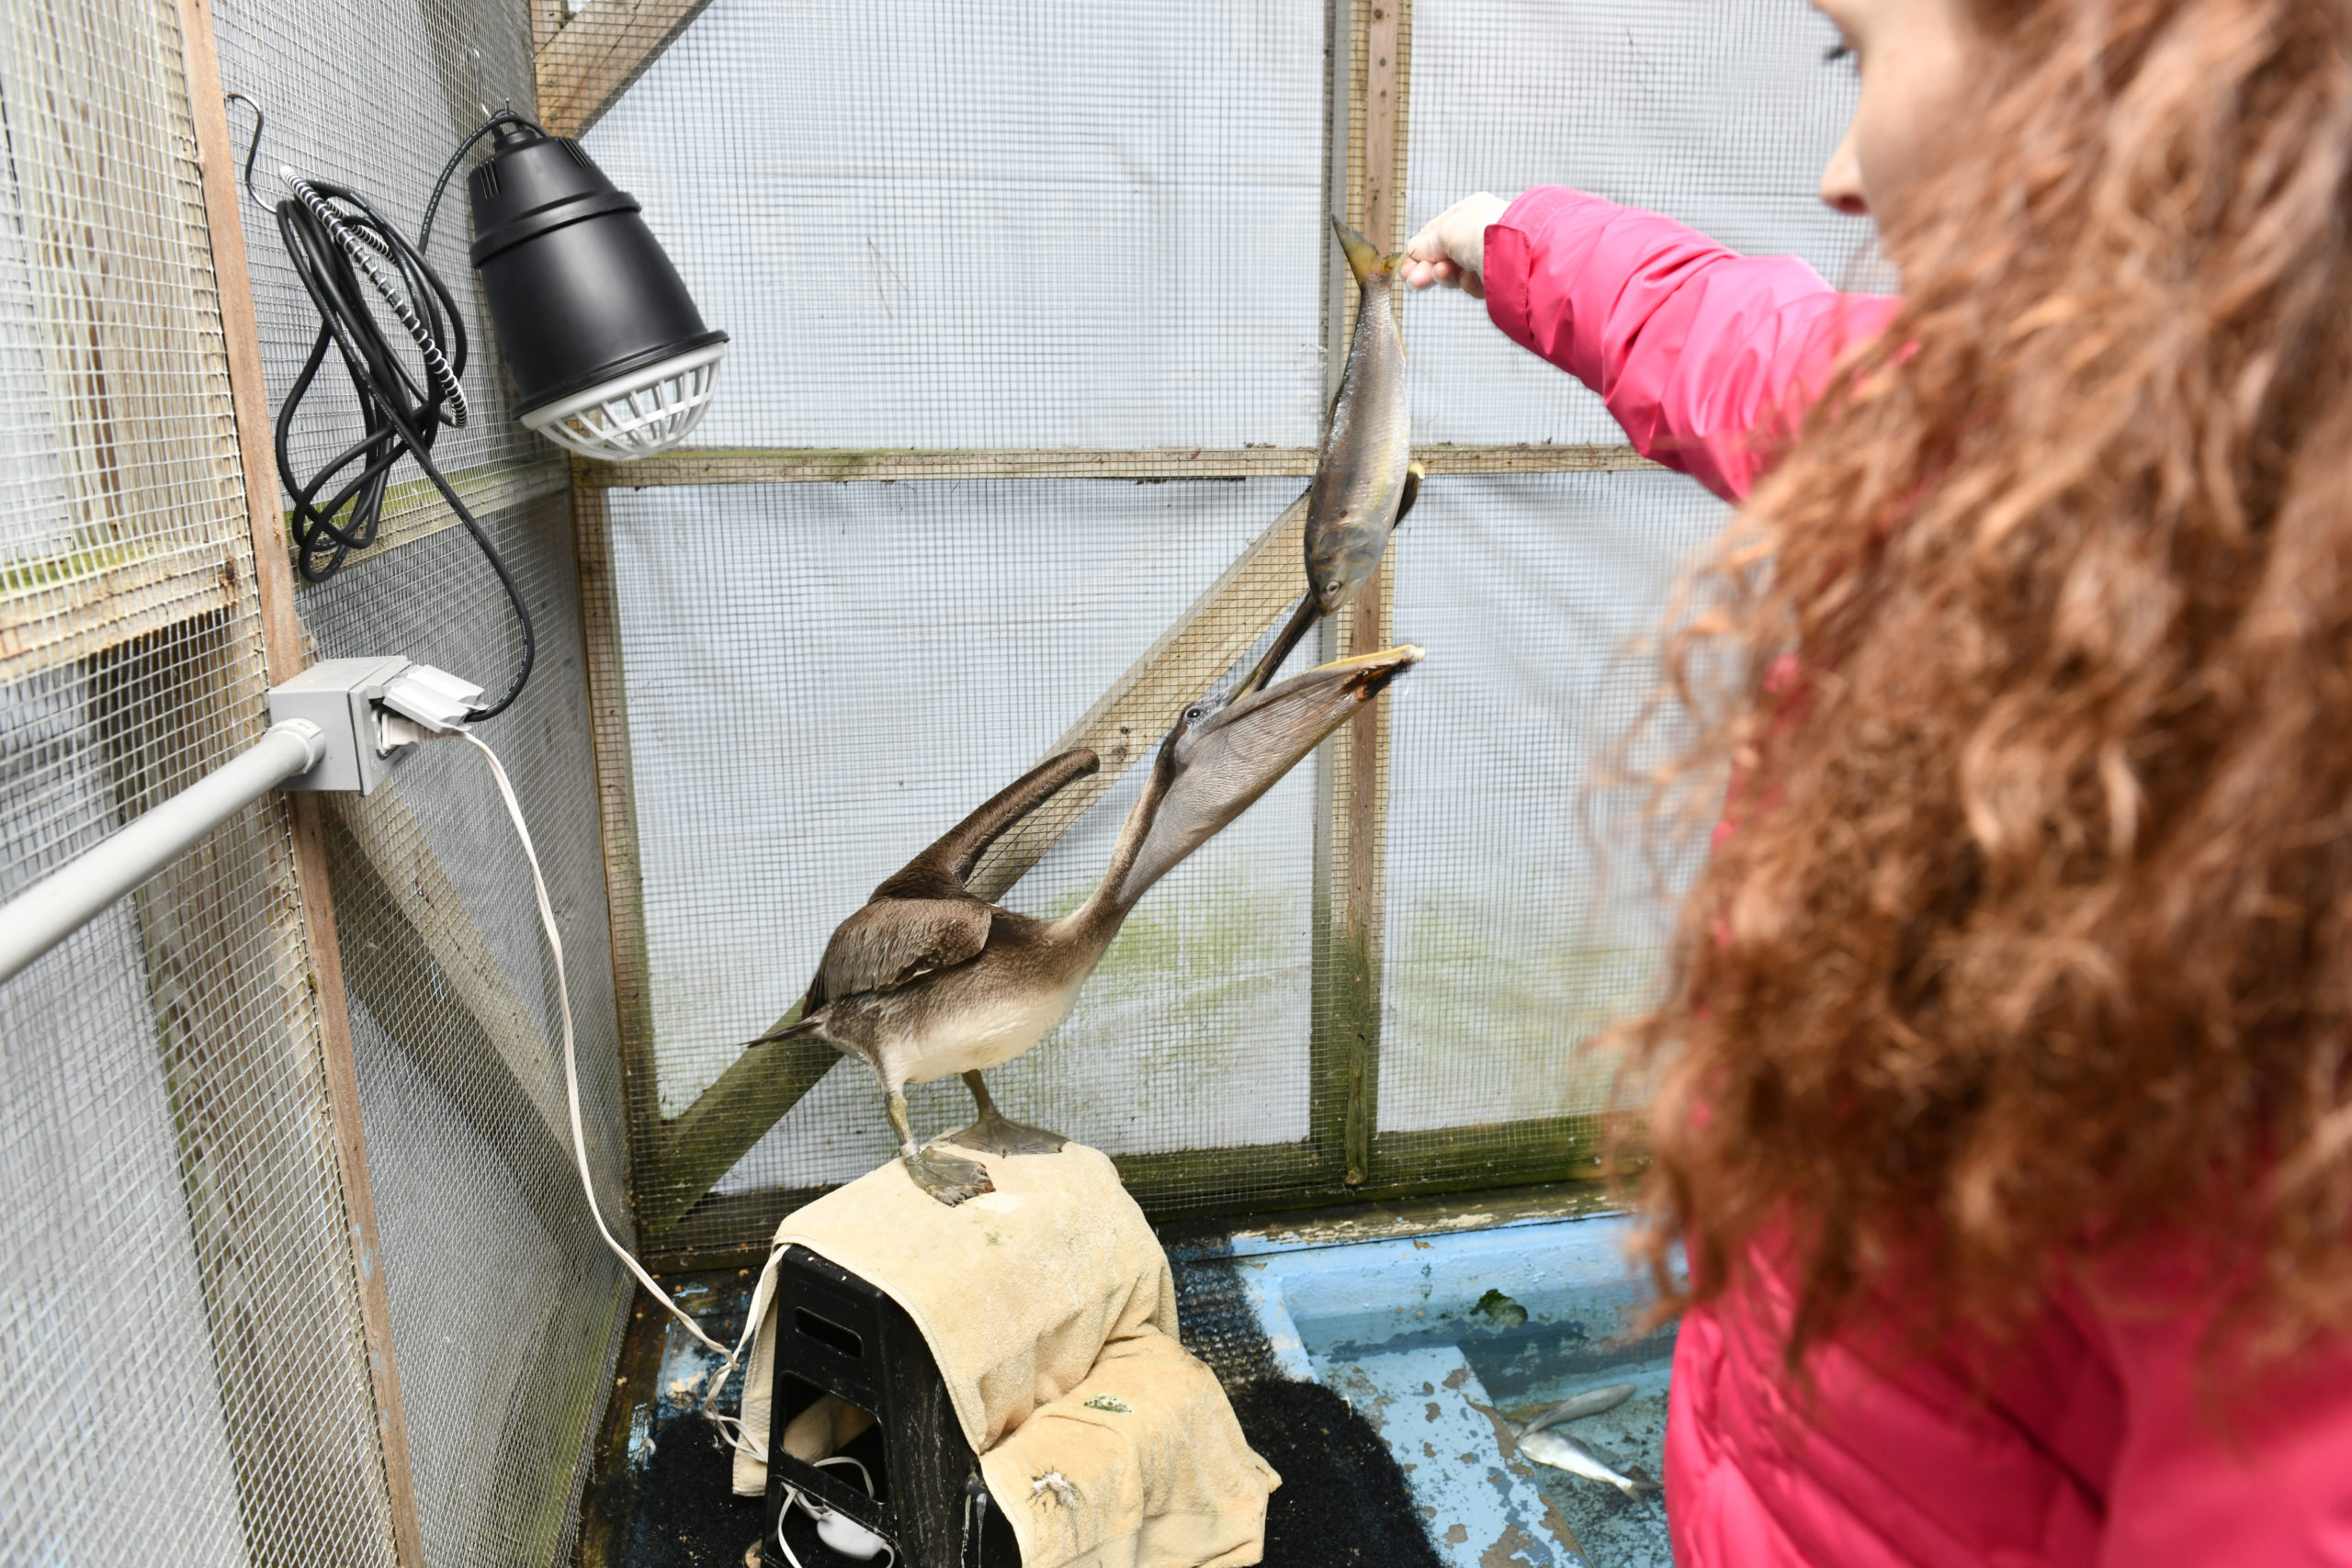 Wildlife rehab staffer Adrienne Gillespie feeds one of the rescued pelicans at the Evelyn Alexander Wildlife Rescue Center on Thursday afternoon.  DANA SHAW